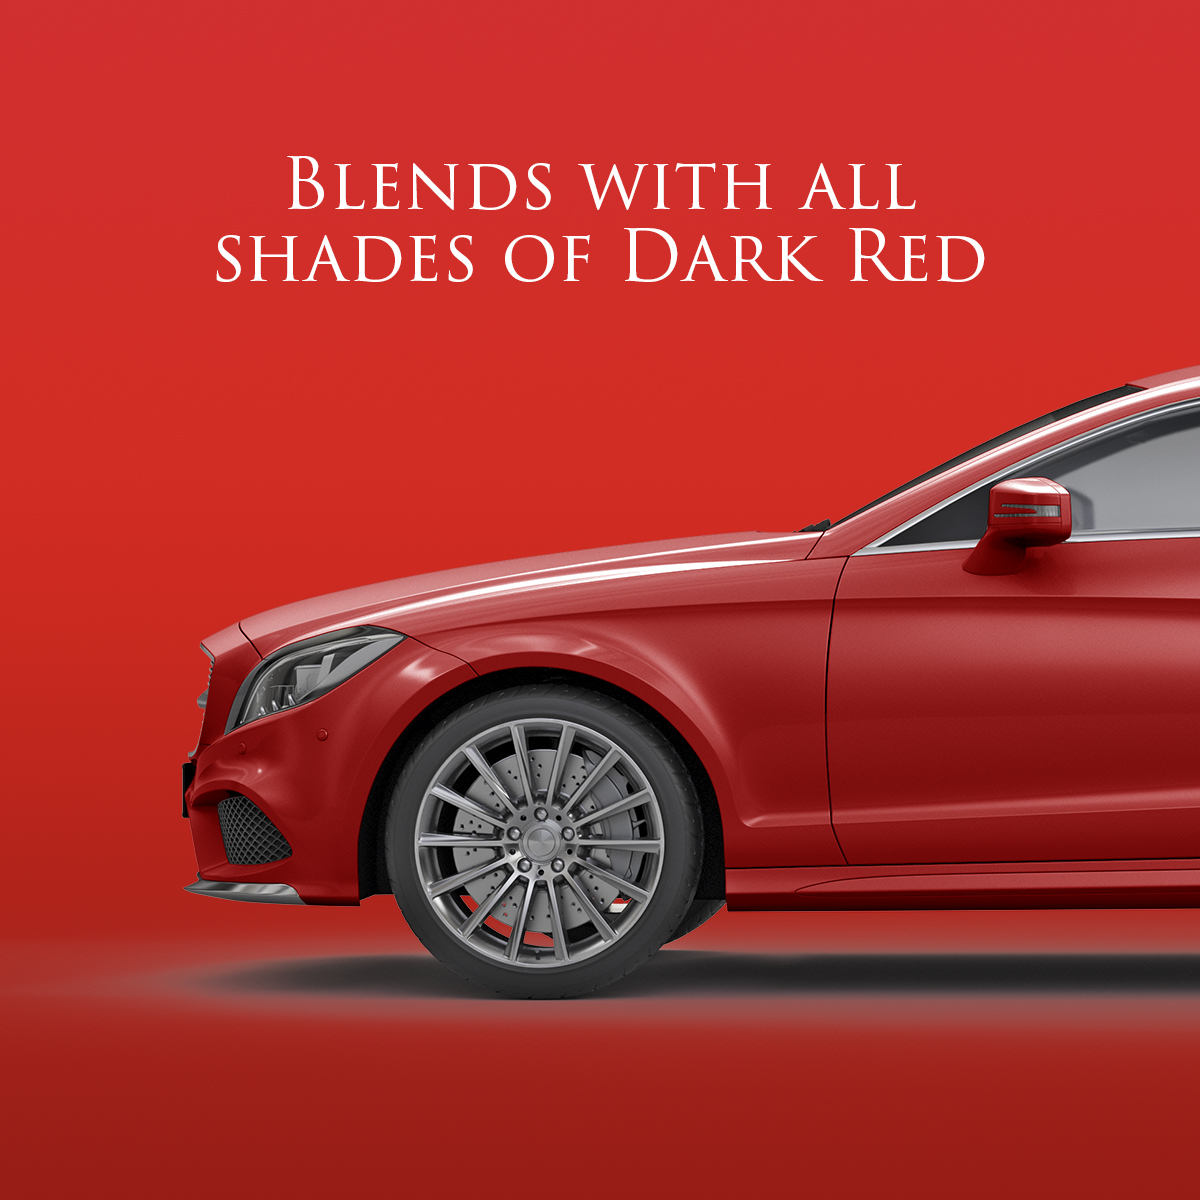 Blends with all shades of dark red